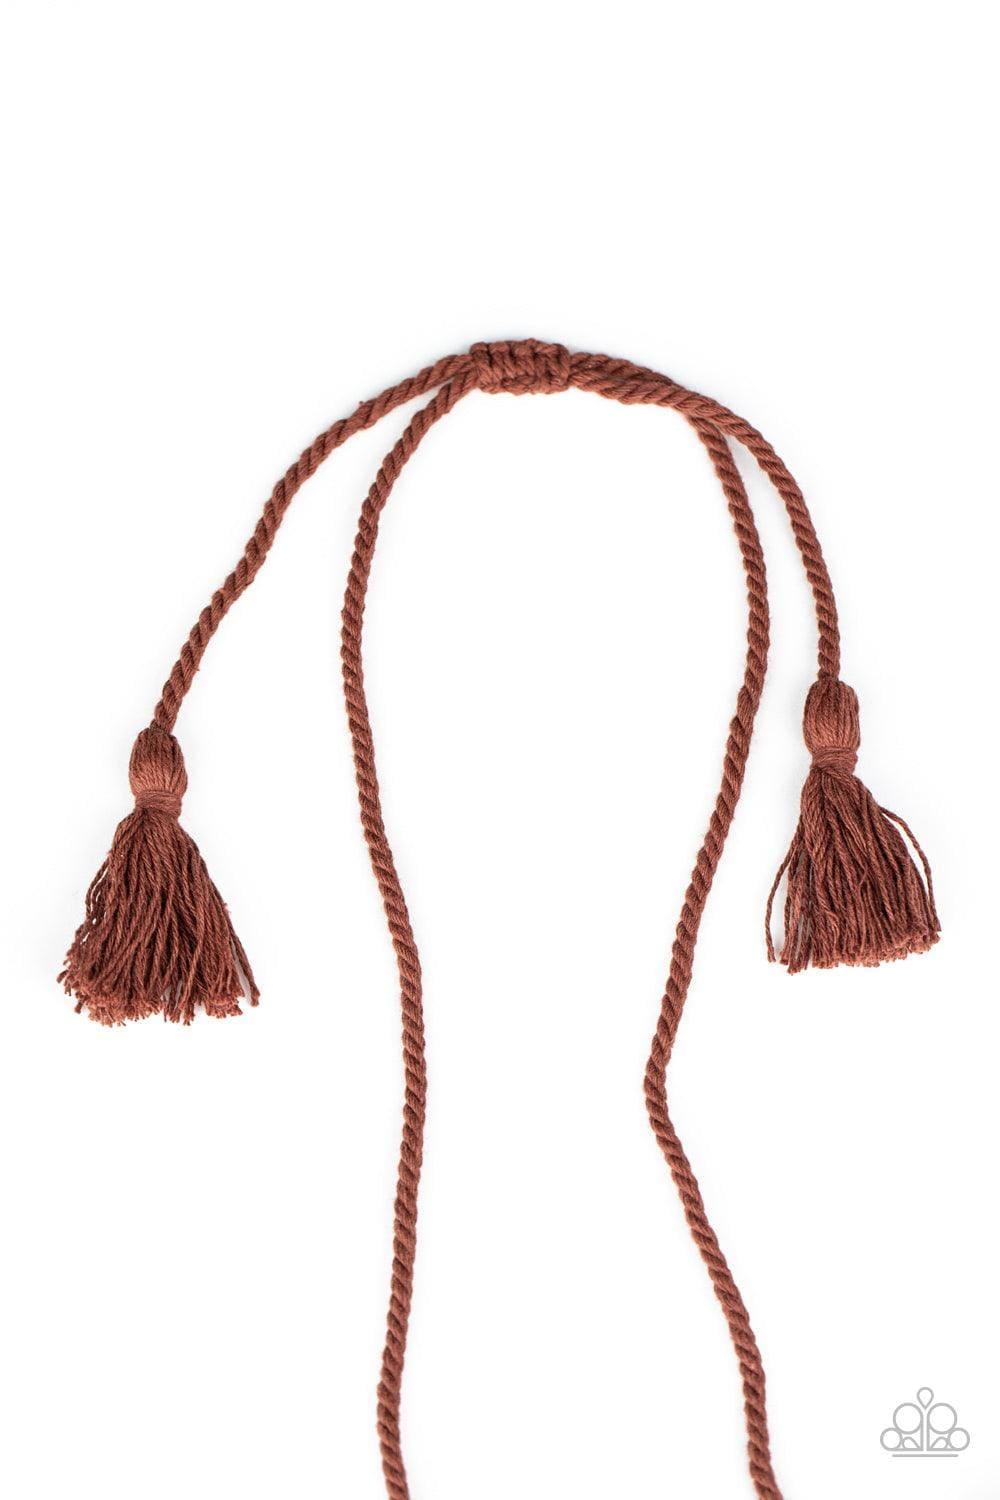 Paparazzi Accessories - Macrame Mantra - Brown Necklace - Bling by JessieK